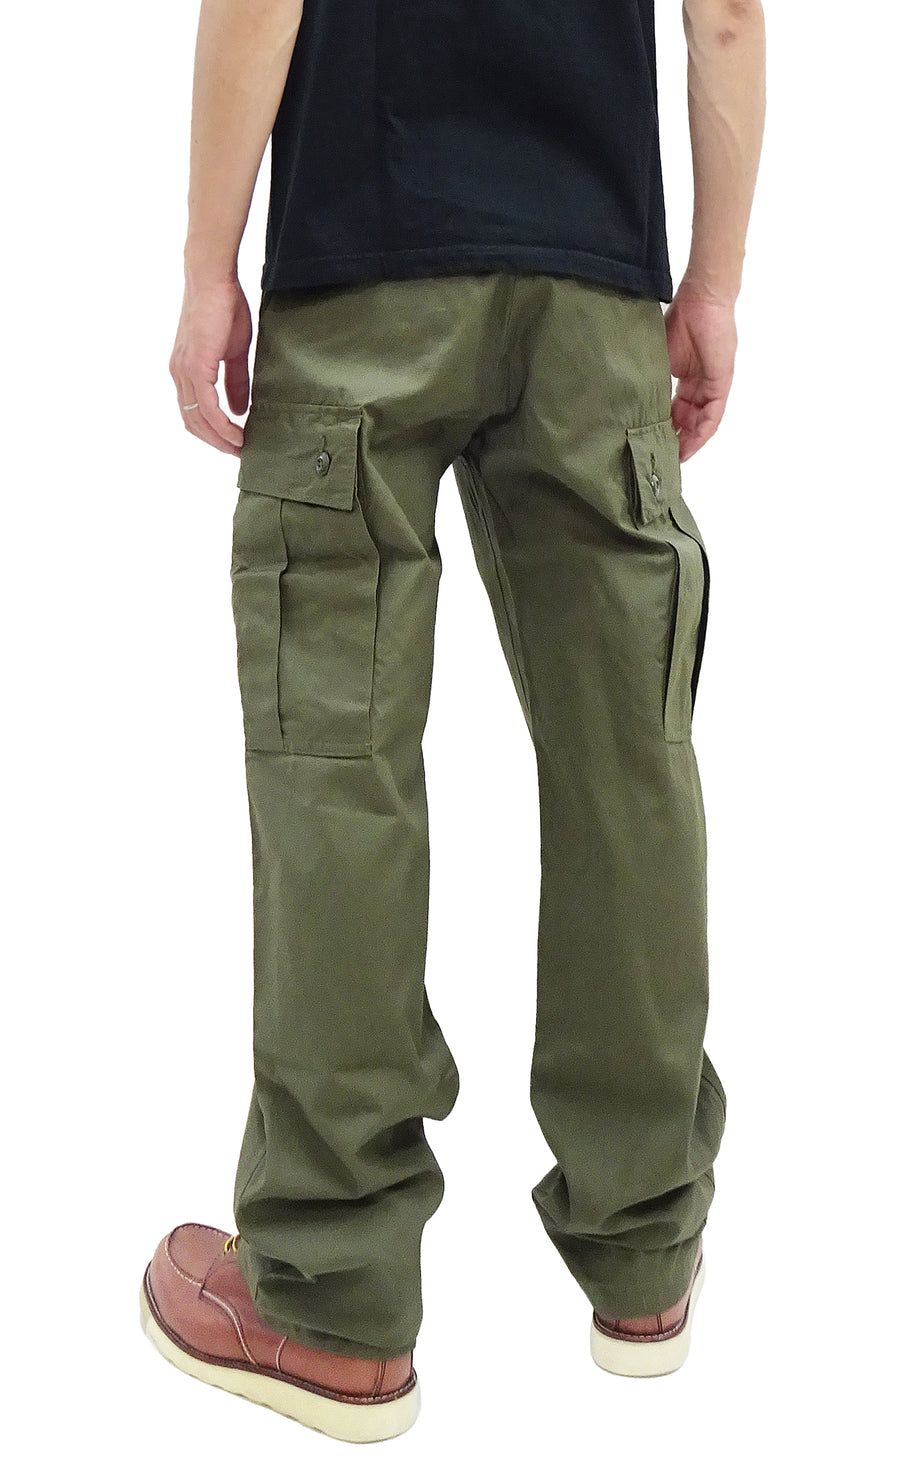 Deconstructed Trouser Mini Skirt with Pockets in Olive